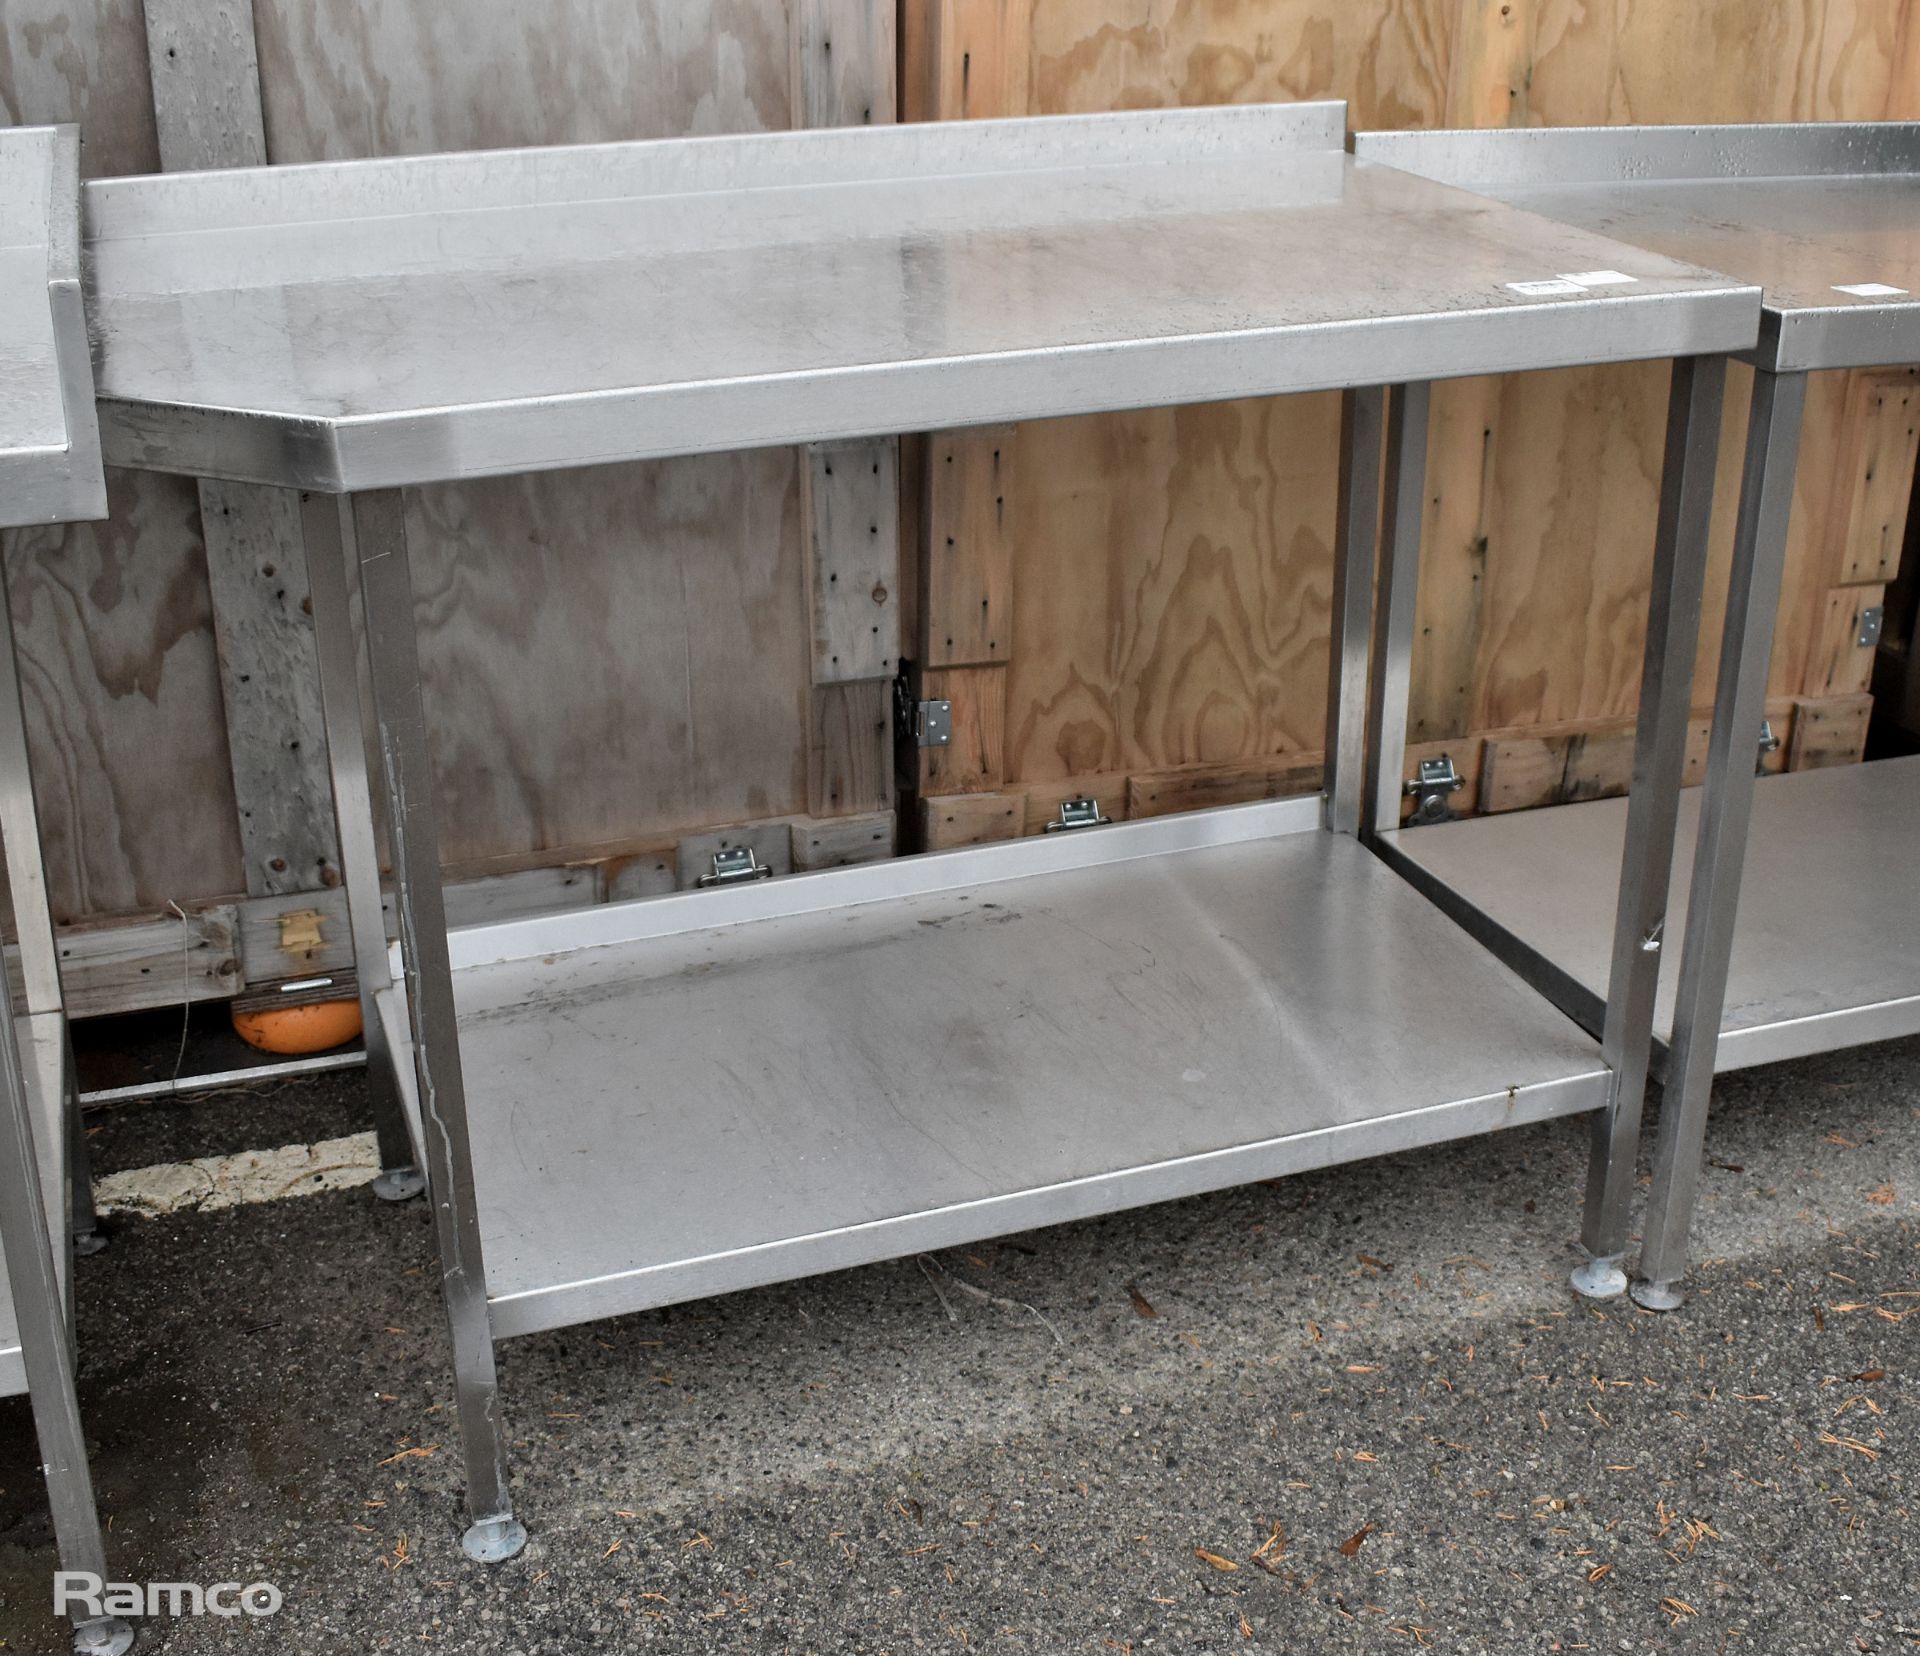 Stainless steel table with shelf - 120x70x98cm - Image 3 of 3